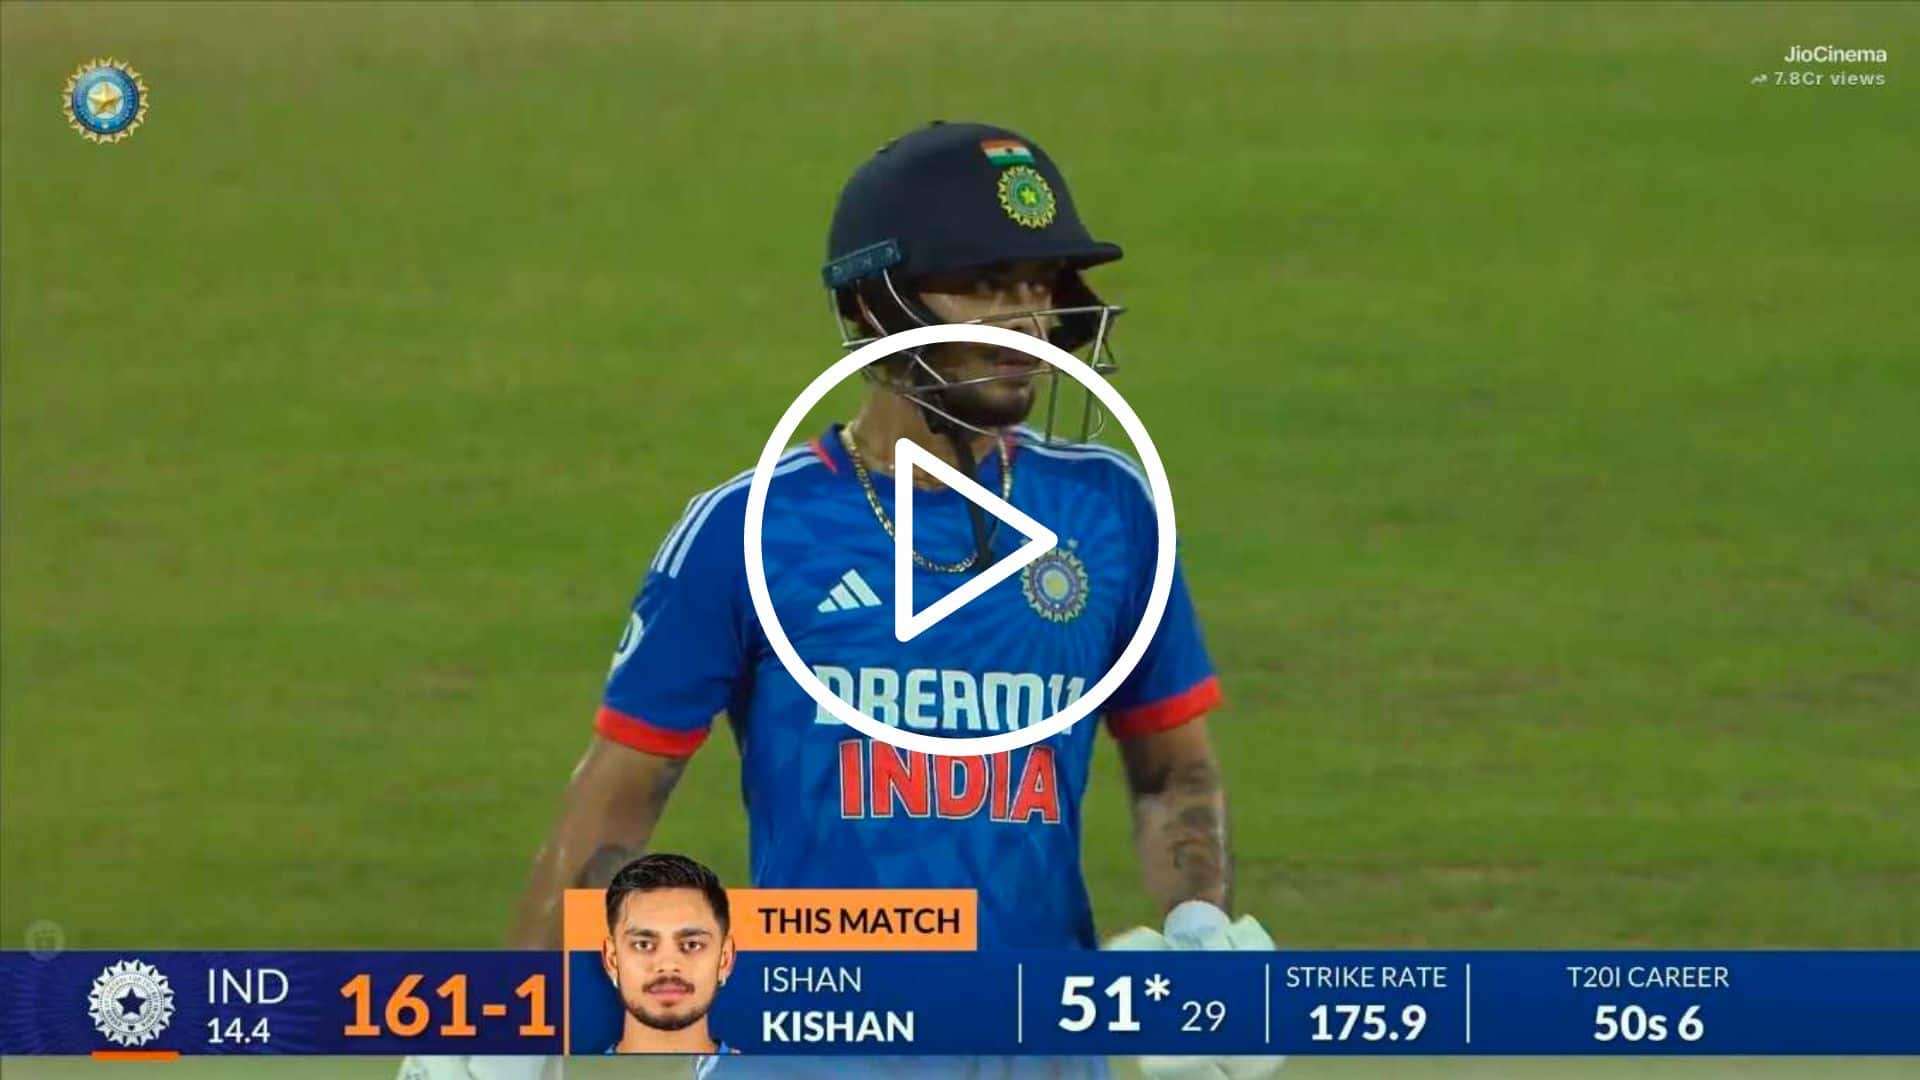 [Watch] Marcus Stoinis Sends Ishan Kishan Packing As Aussies Bag Another Blood